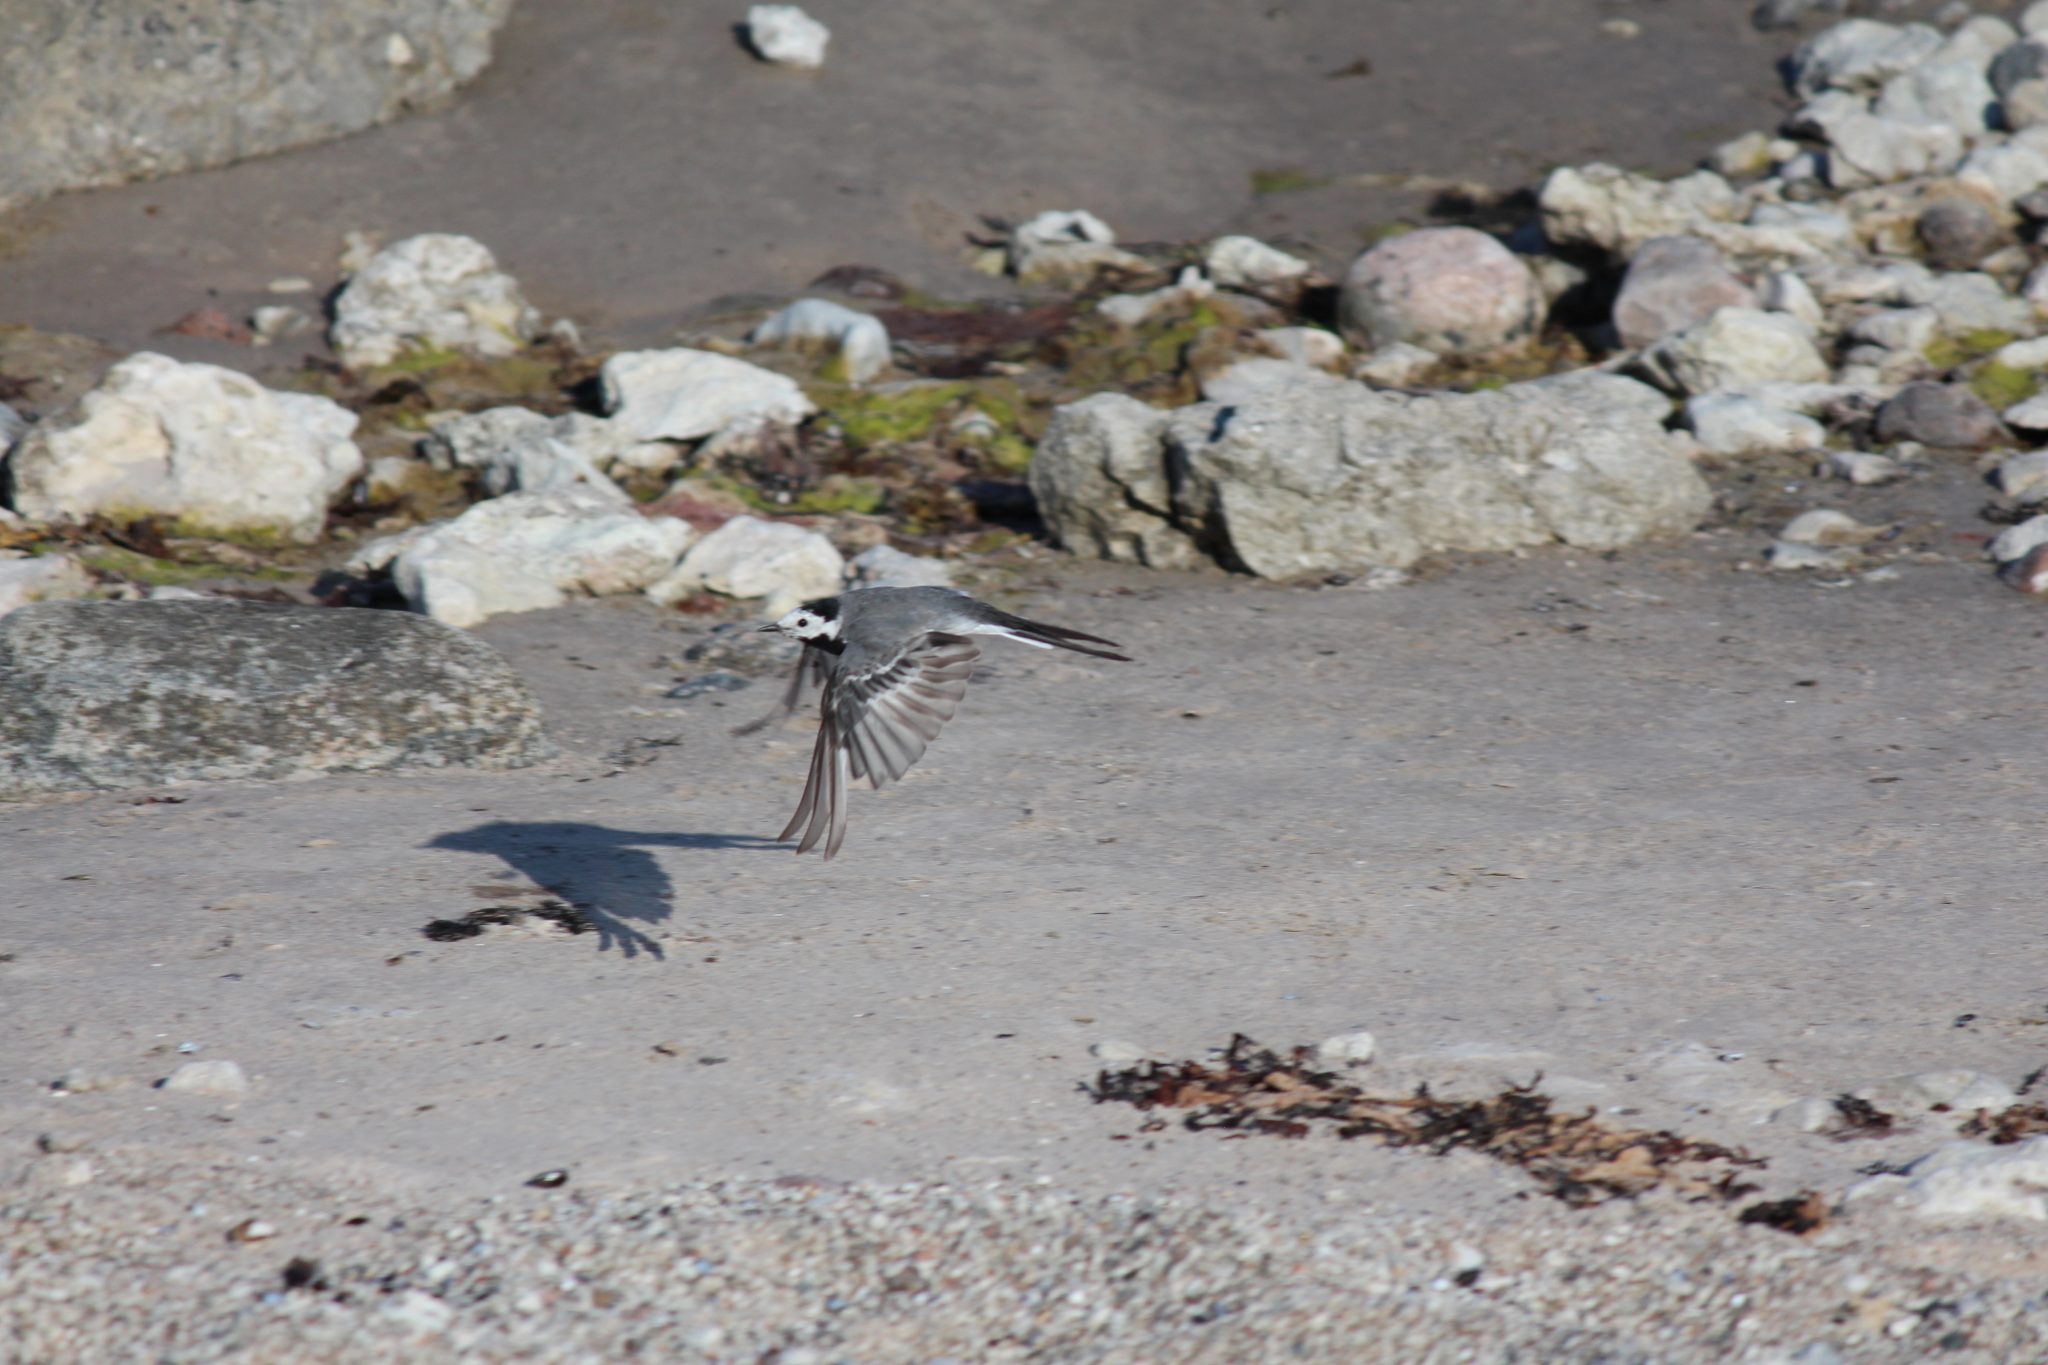 Wagtail coming in for landing.